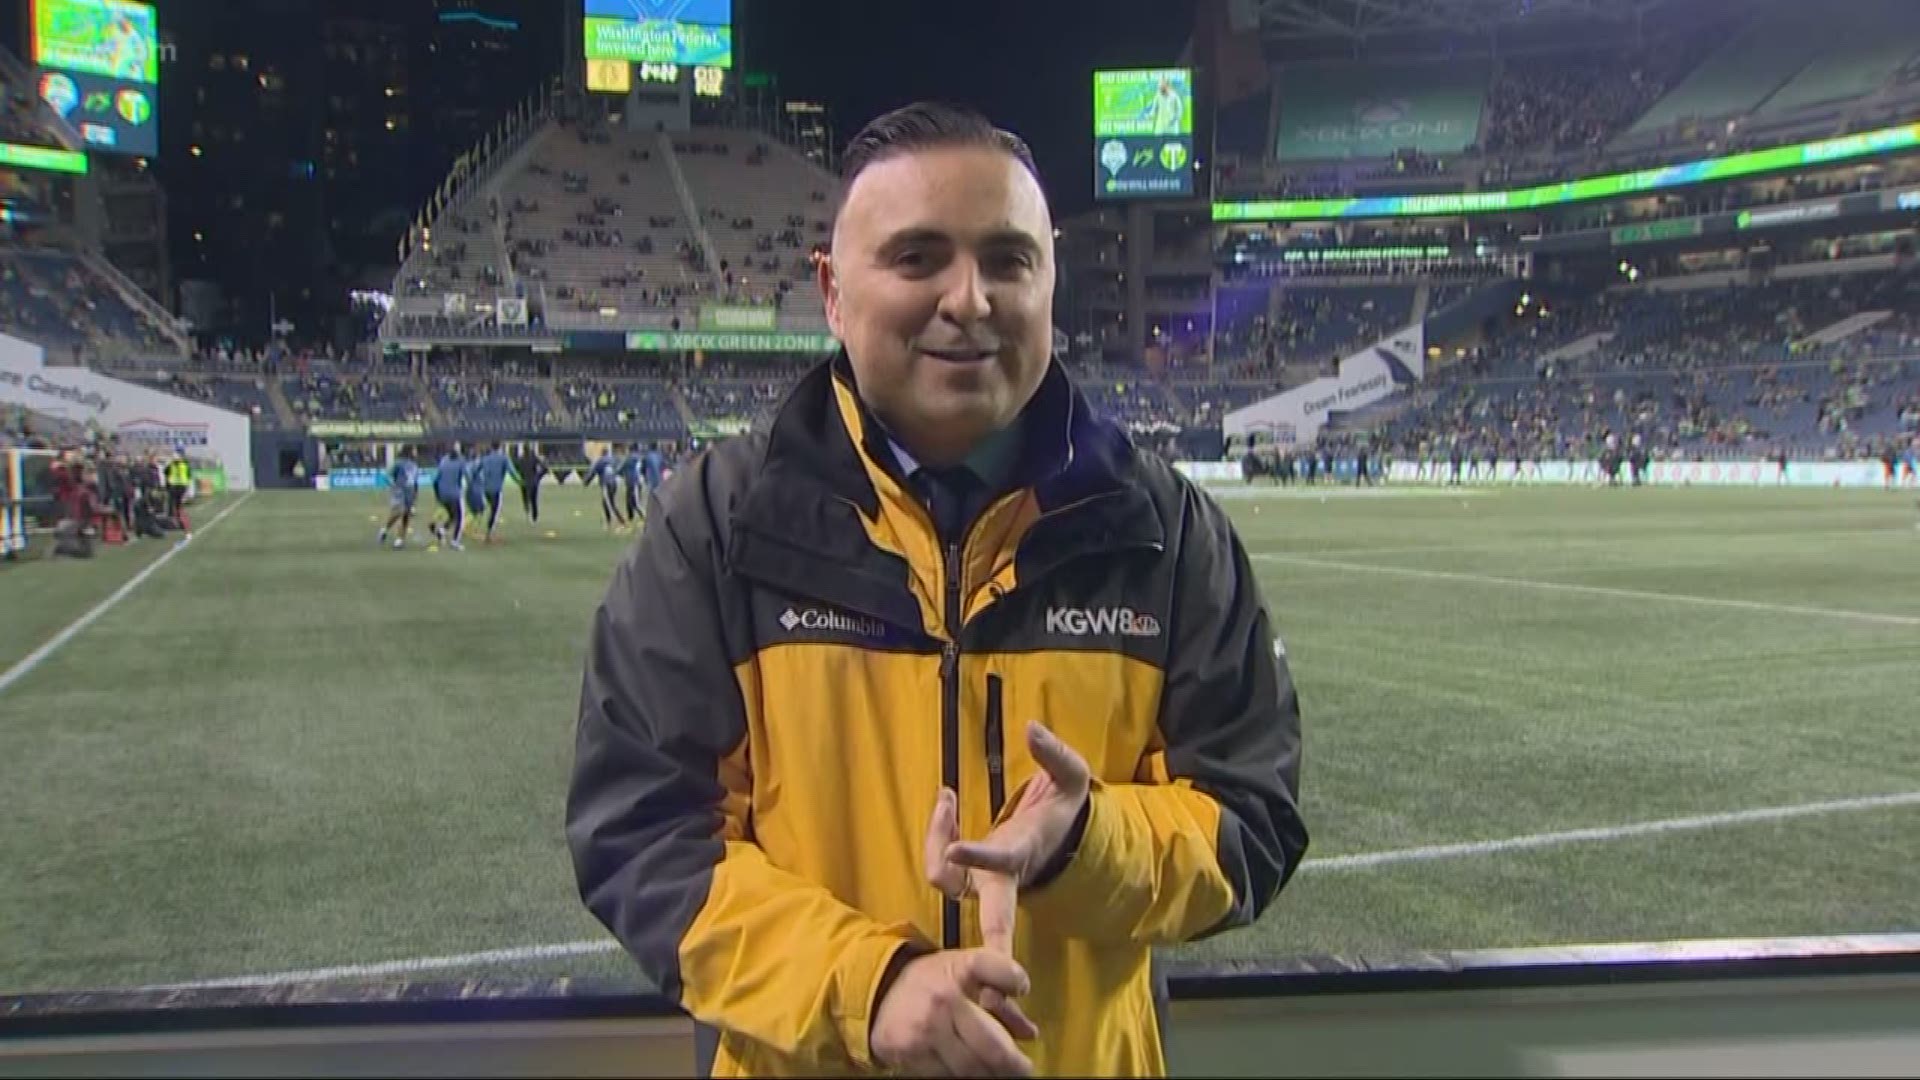 Orlando is in the stadium as the Timbers take on the Sounders for the 2nd leg of the playoffs.

#TonightwithCassidy